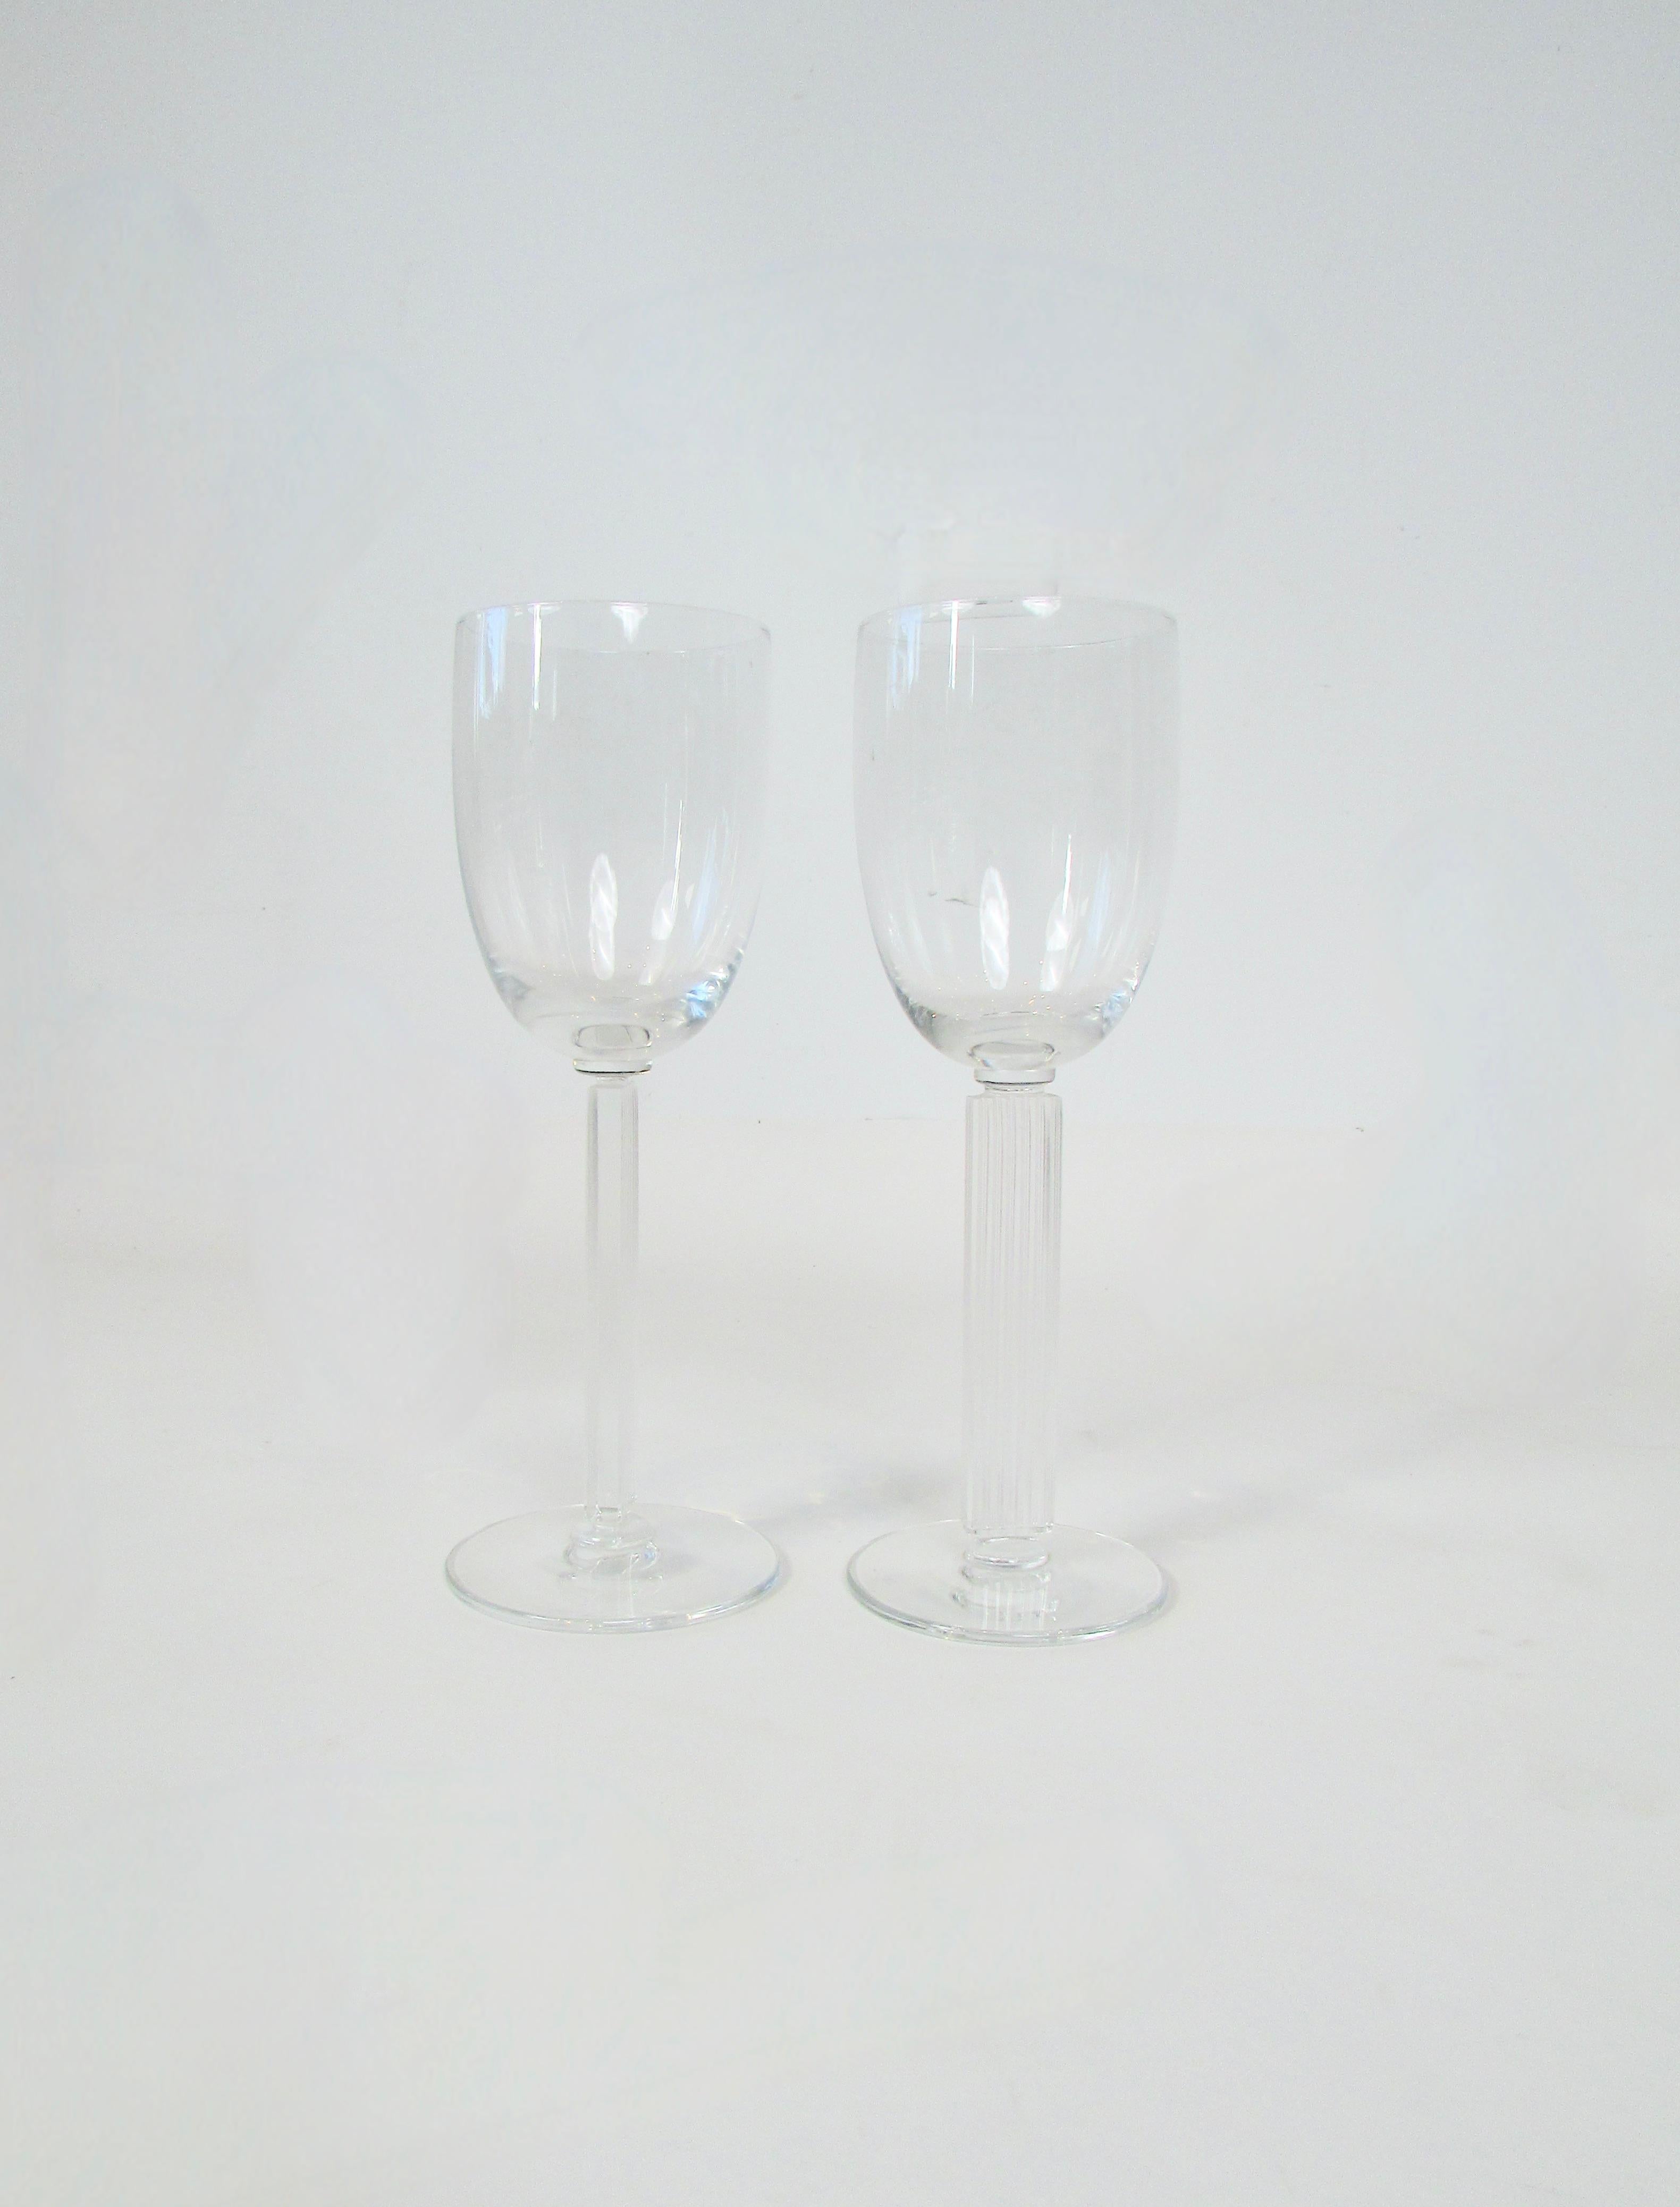 Pair of Embassy pattern champagne coupes or martini glasses designed by Walter Dorwin Teague and Edwin W. Fuerst for the Libbey glass company in 1939. Styled during the Art Deco machine age and somewhat scarce today . Embassy pattern stemware can be